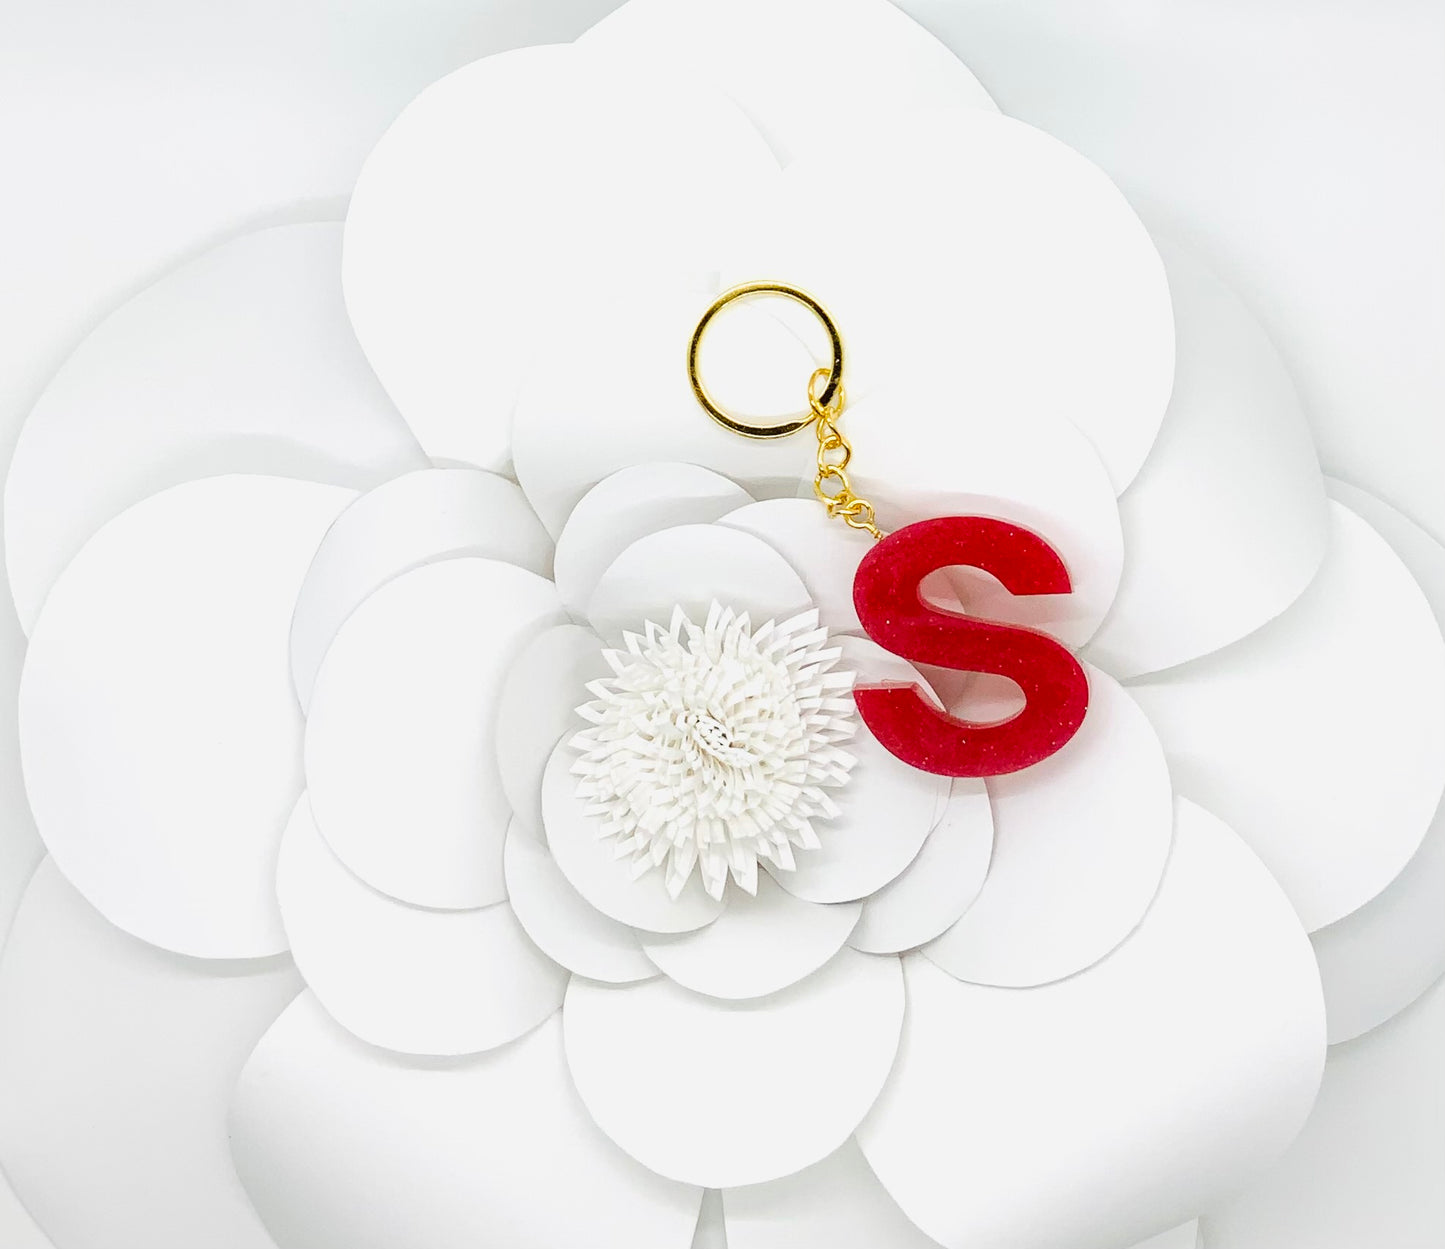 The Letter "S" Keychain